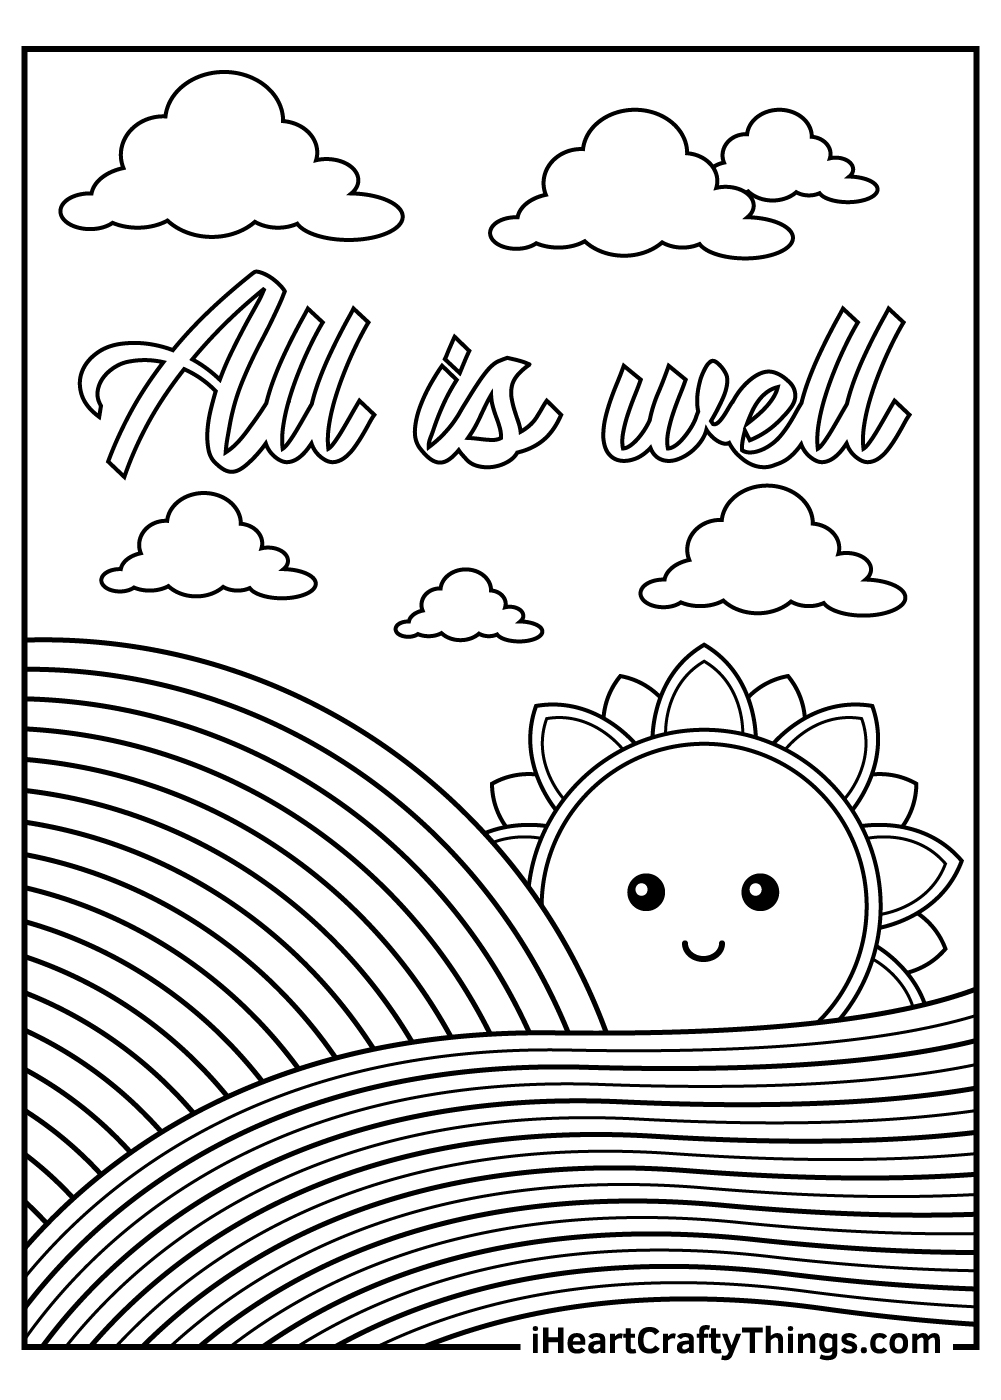 Stress Relief Coloring Pages Updated 20